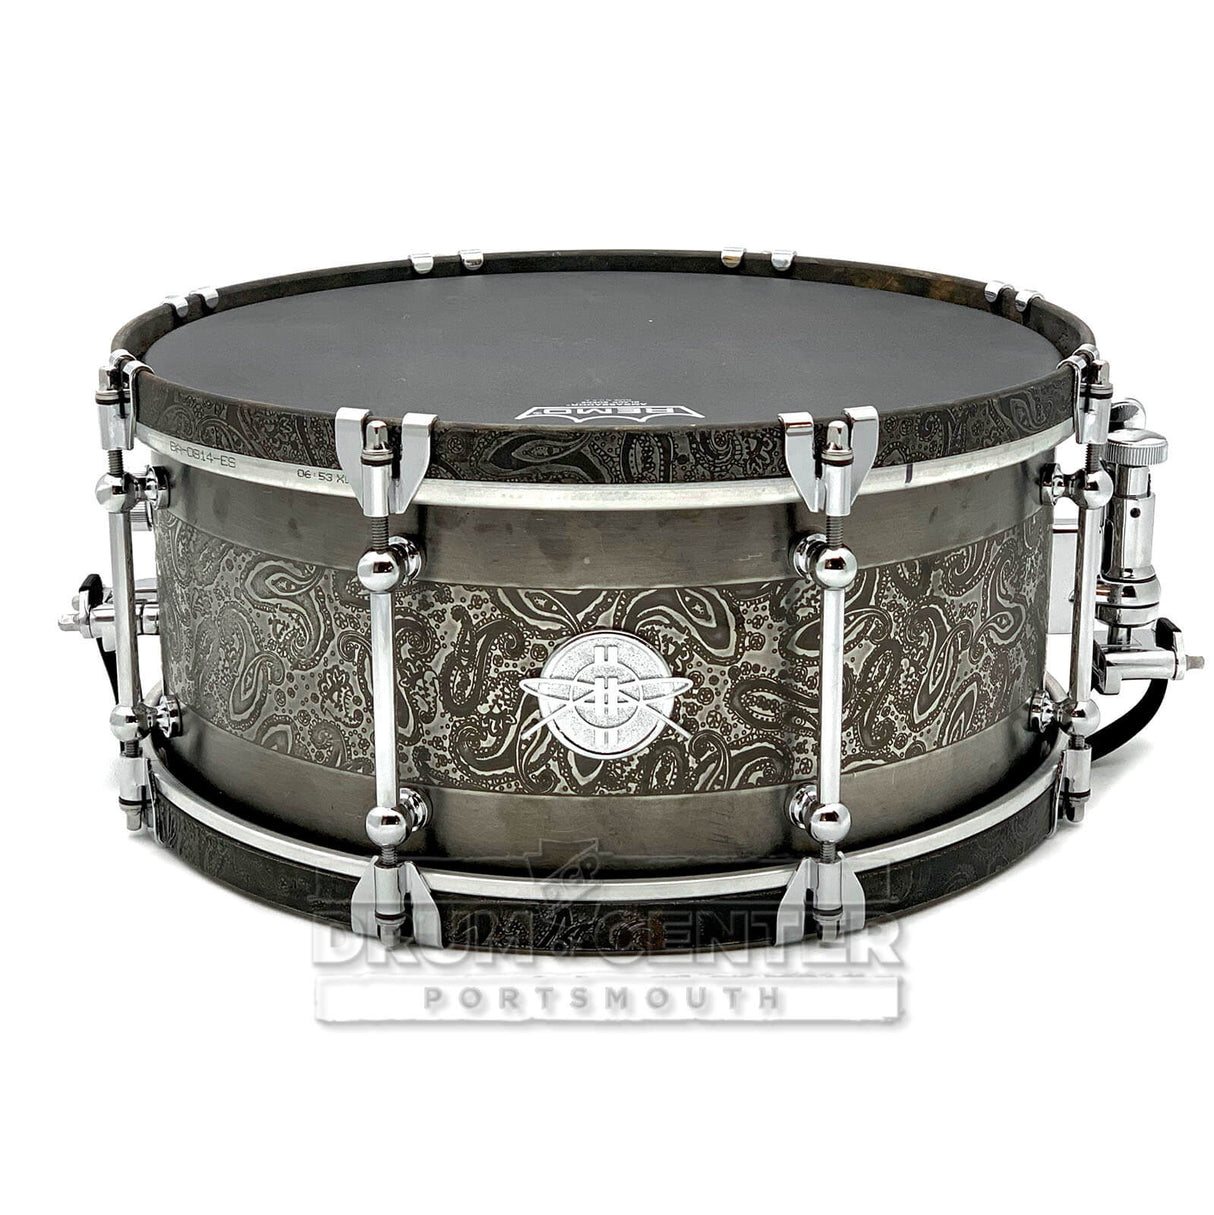 Dunnett Classic Steel Snare Drum 14x6.5 w/Shell & Hoops Engraved by James Trussart - Drum Center Of Portsmouth